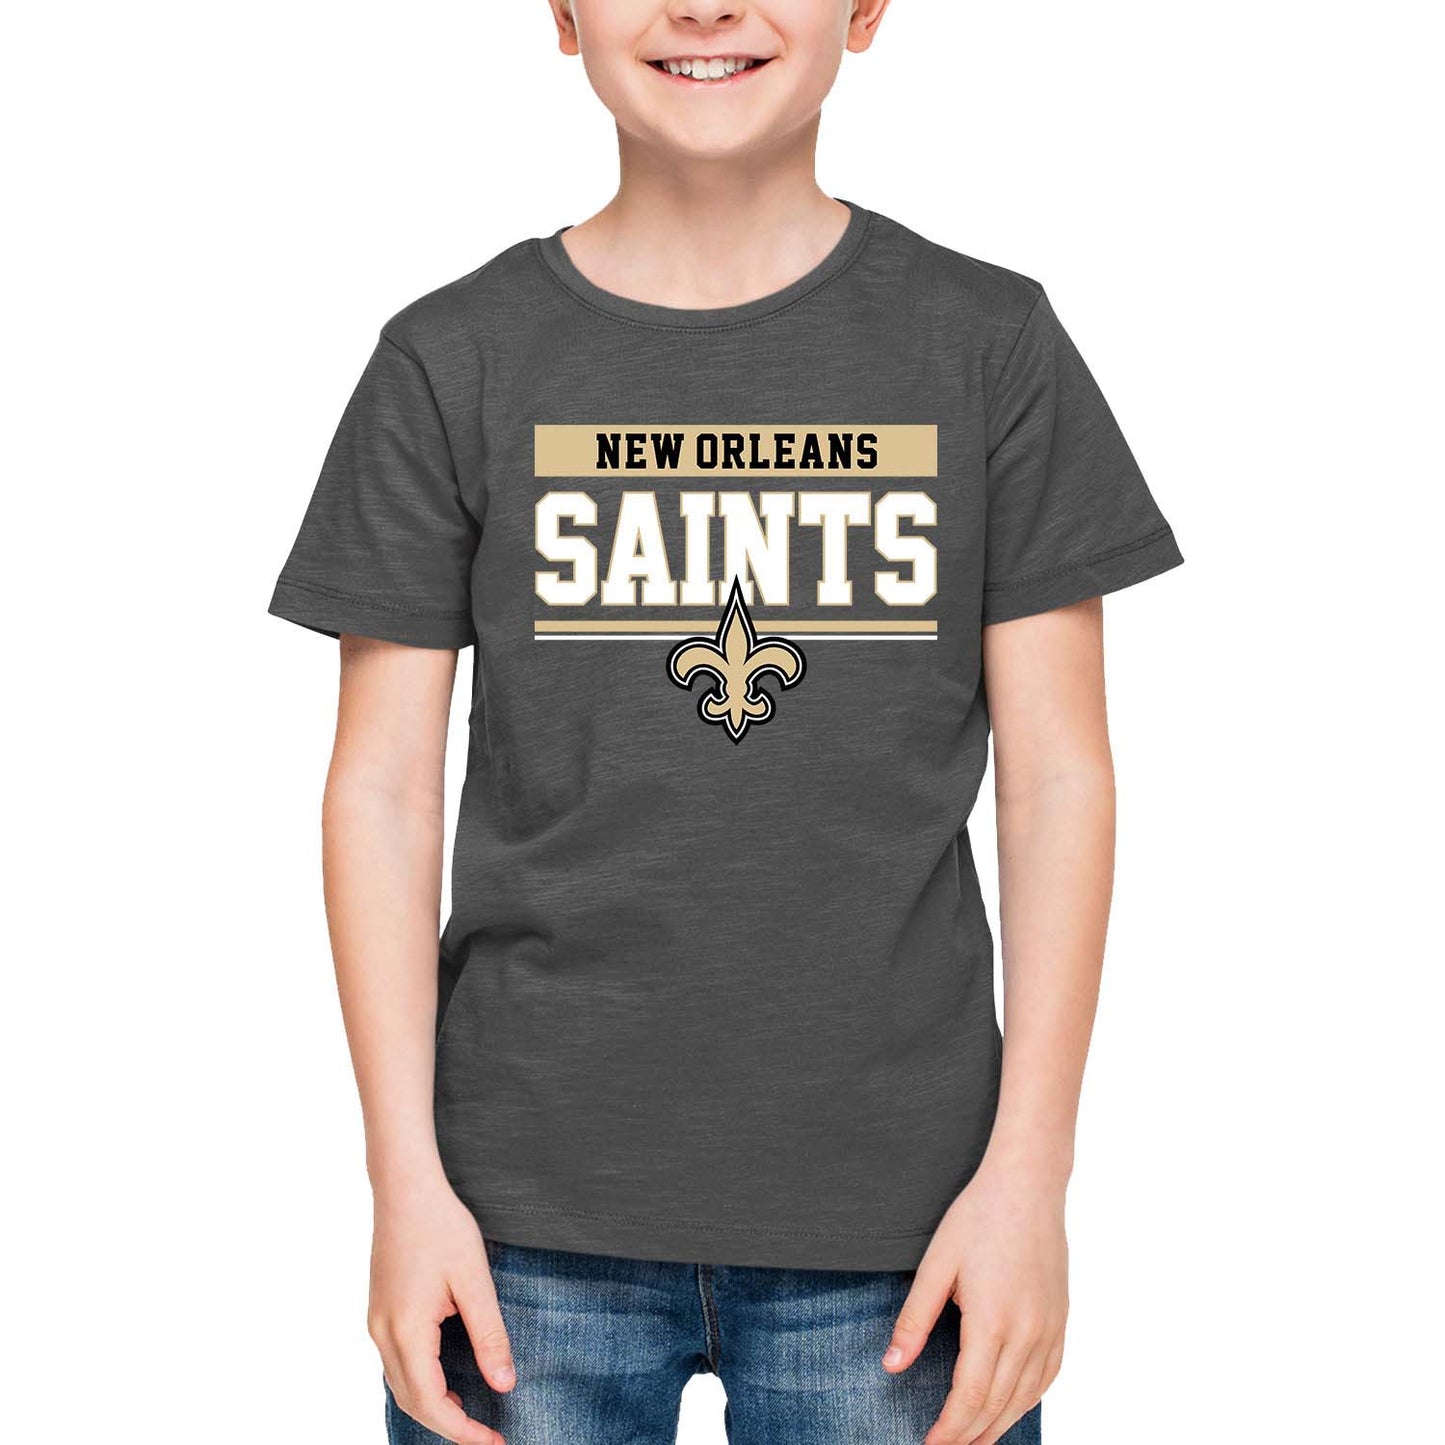 New Orleans Saints NFL Youth Short Sleeve Charcoal T Shirt - Charcoal